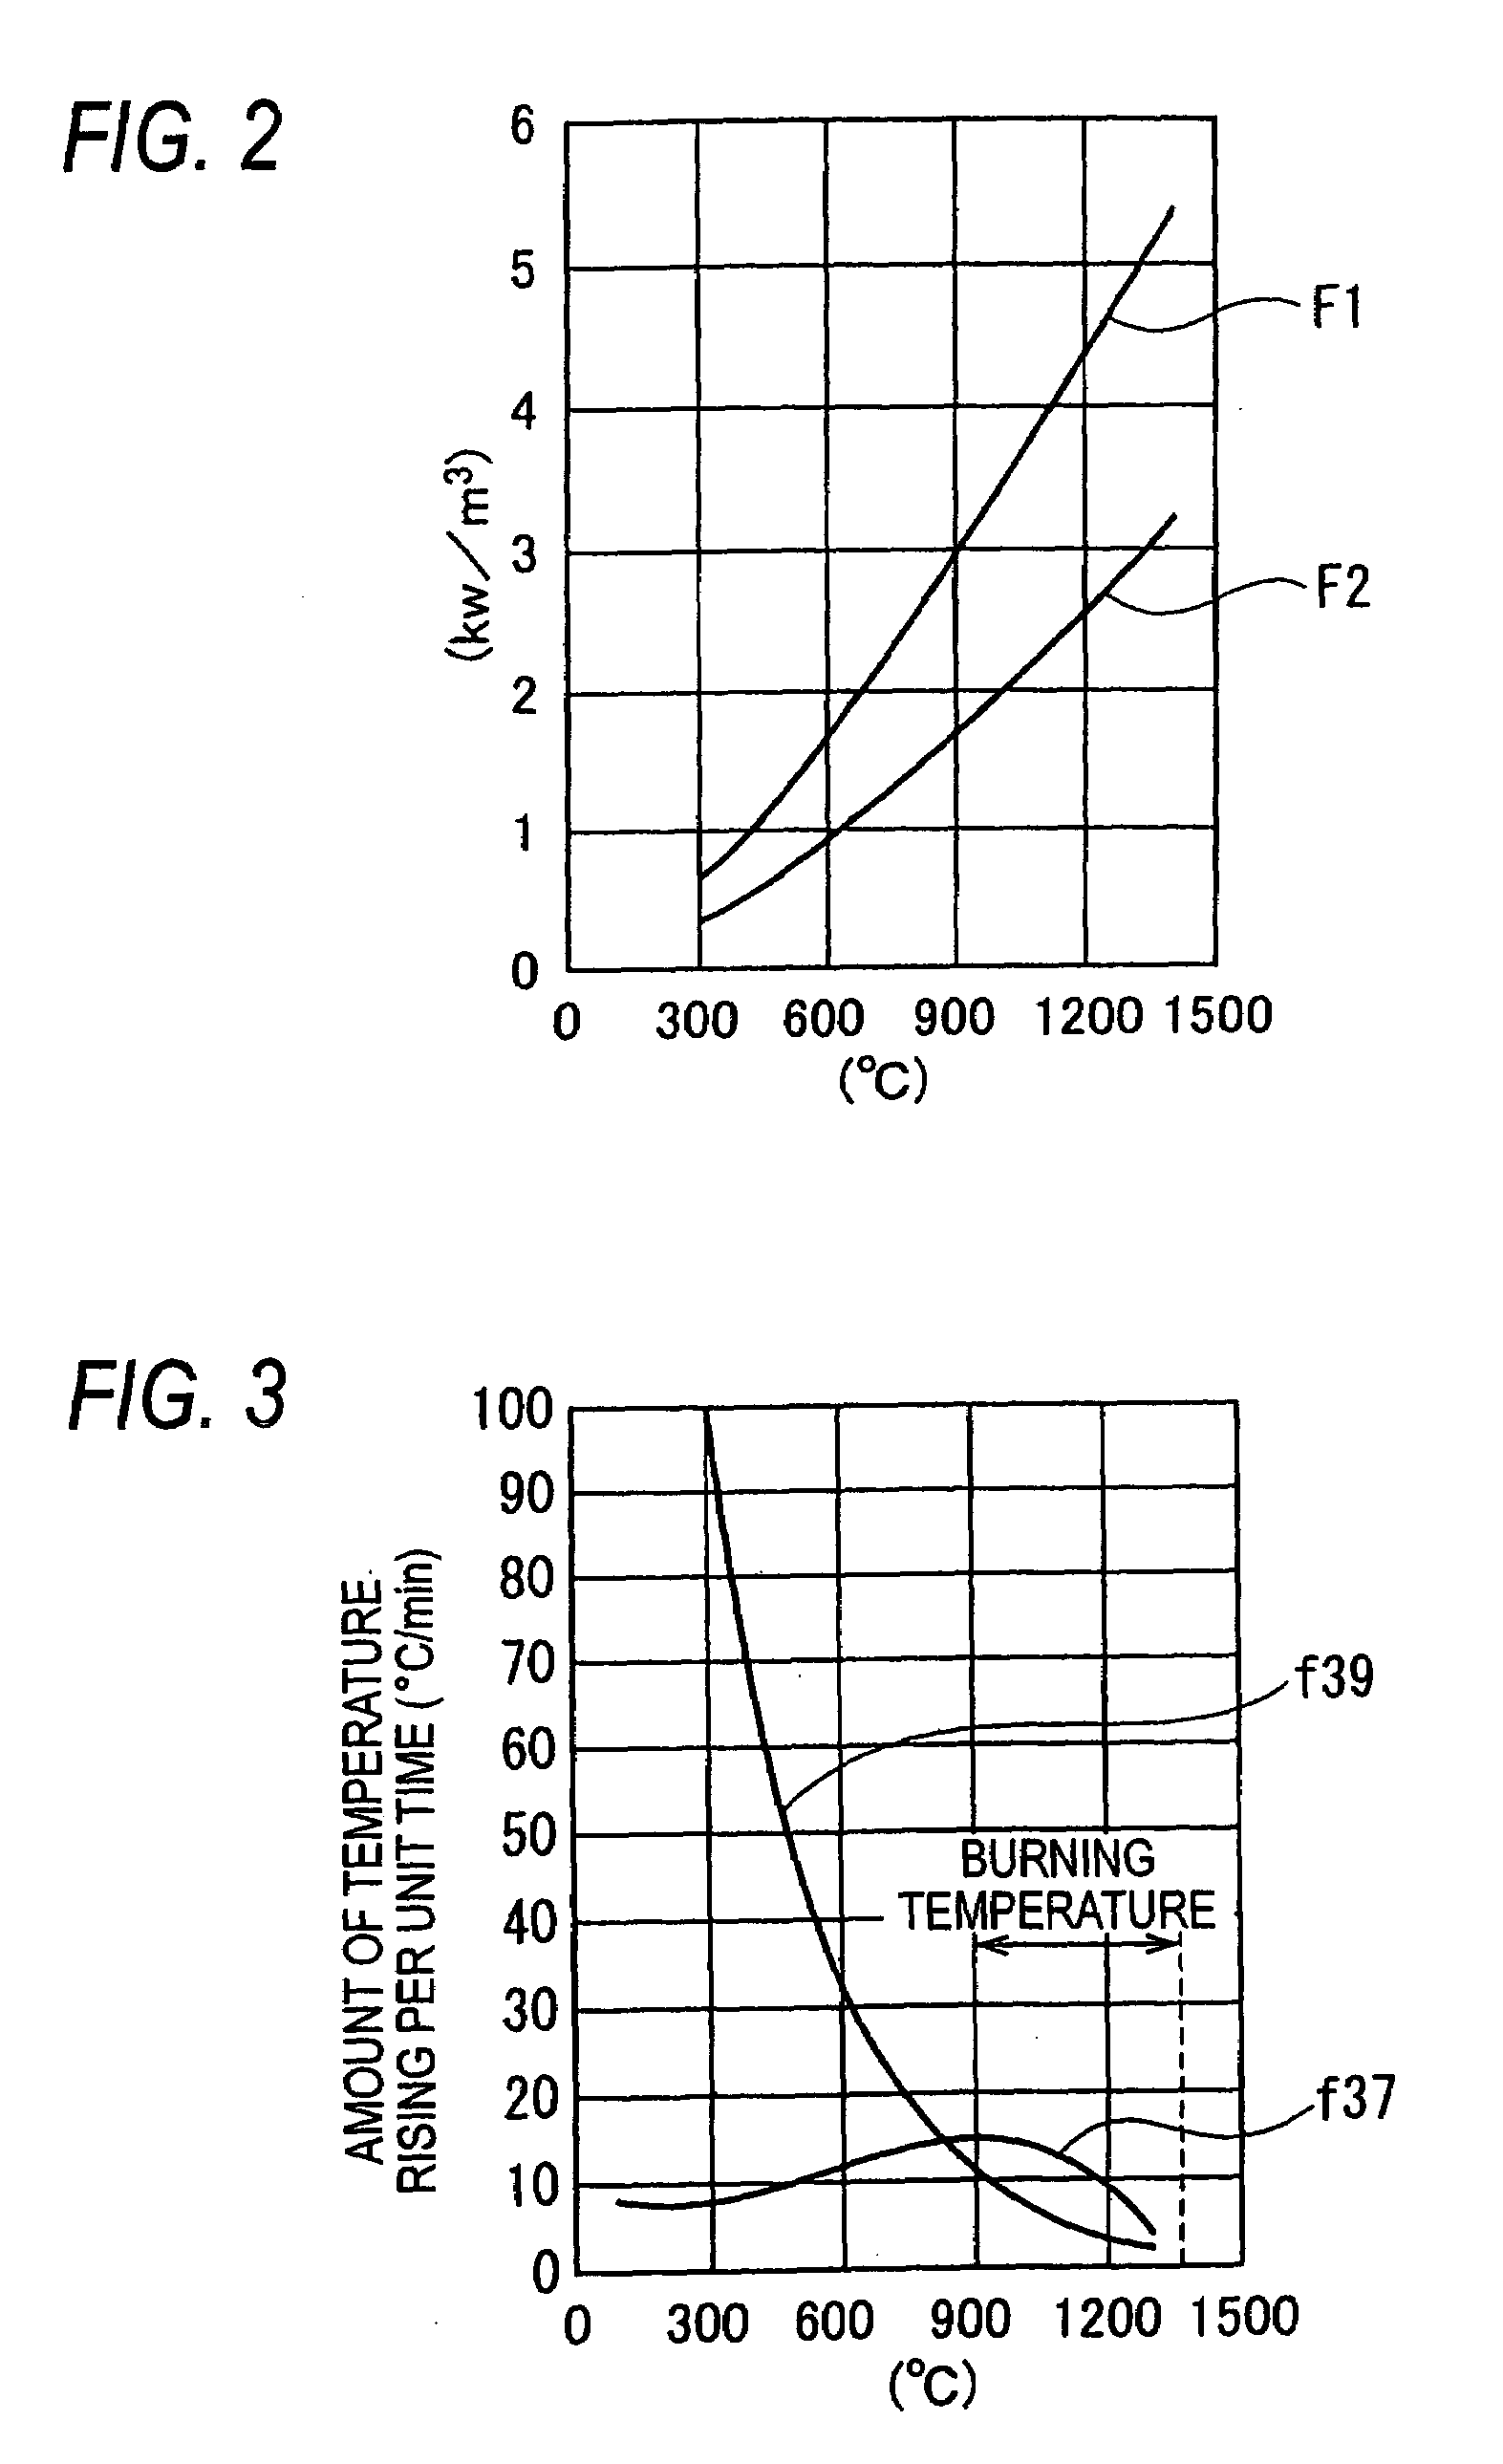 Microwave burning furnace including heating element having two types of materials